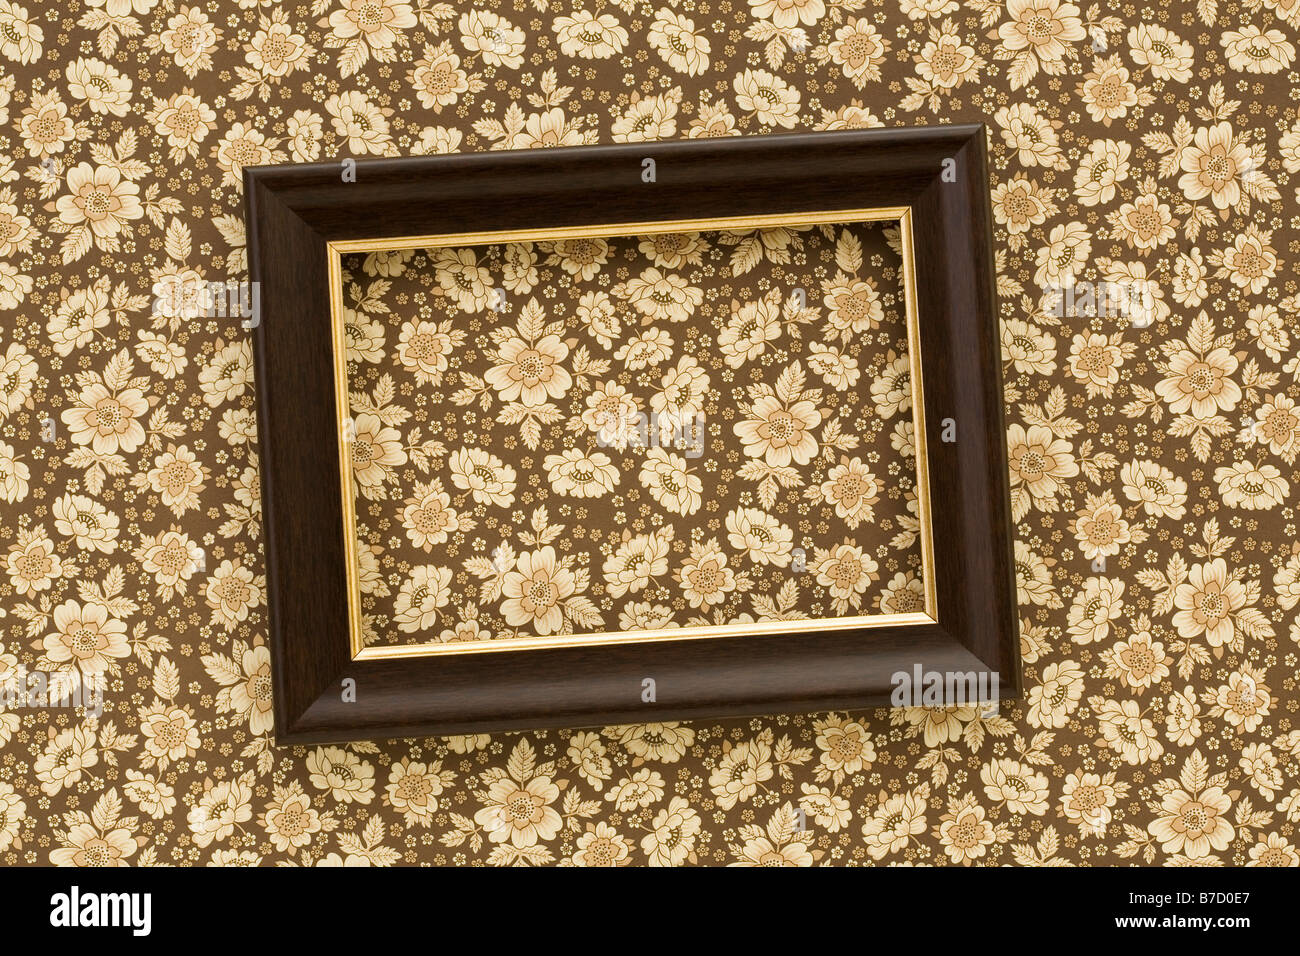 A slanted picture frame hanging on a wall Stock Photo